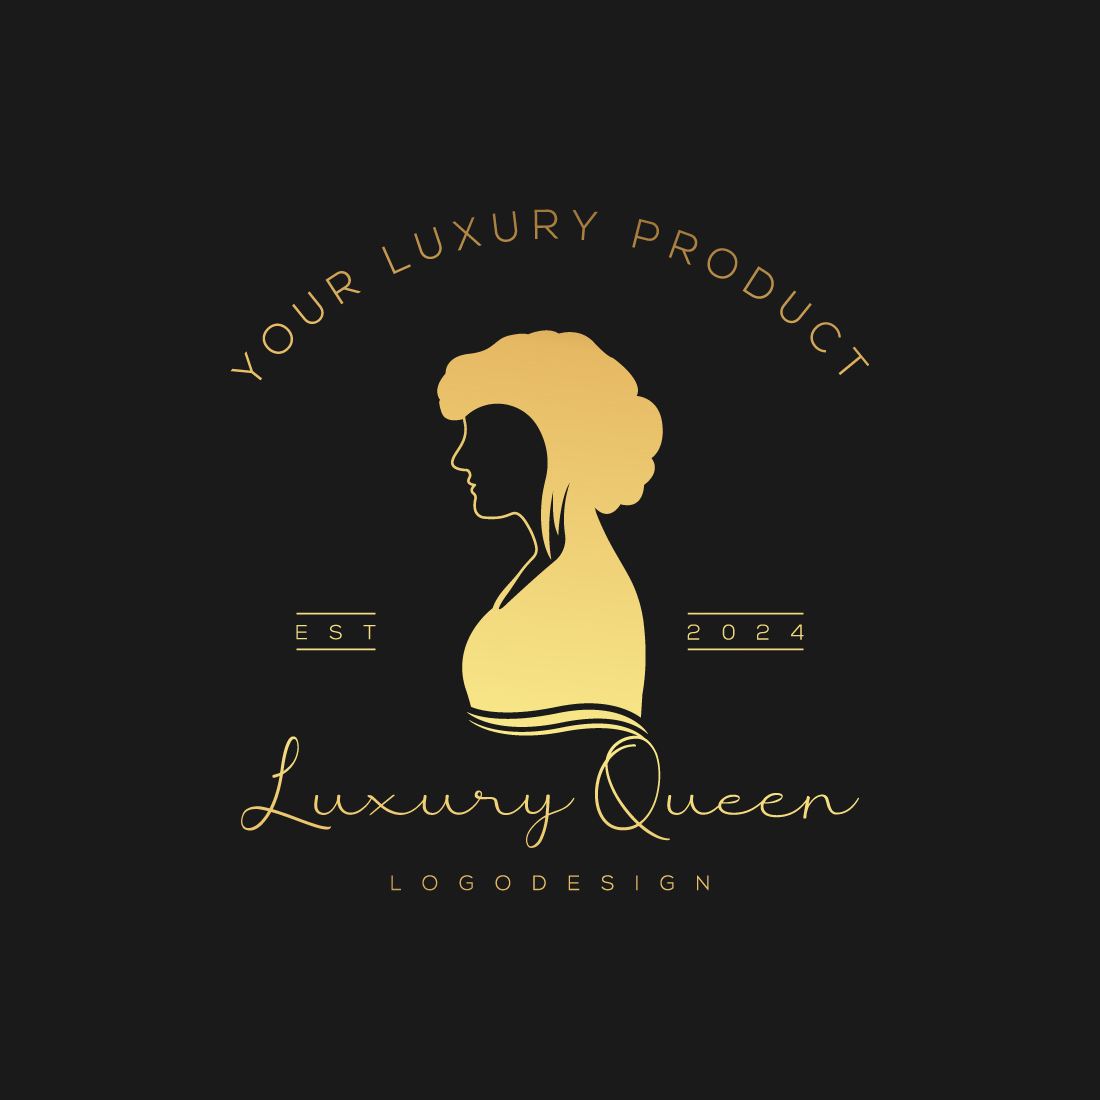 Your Luxury Product 2024 preview image.